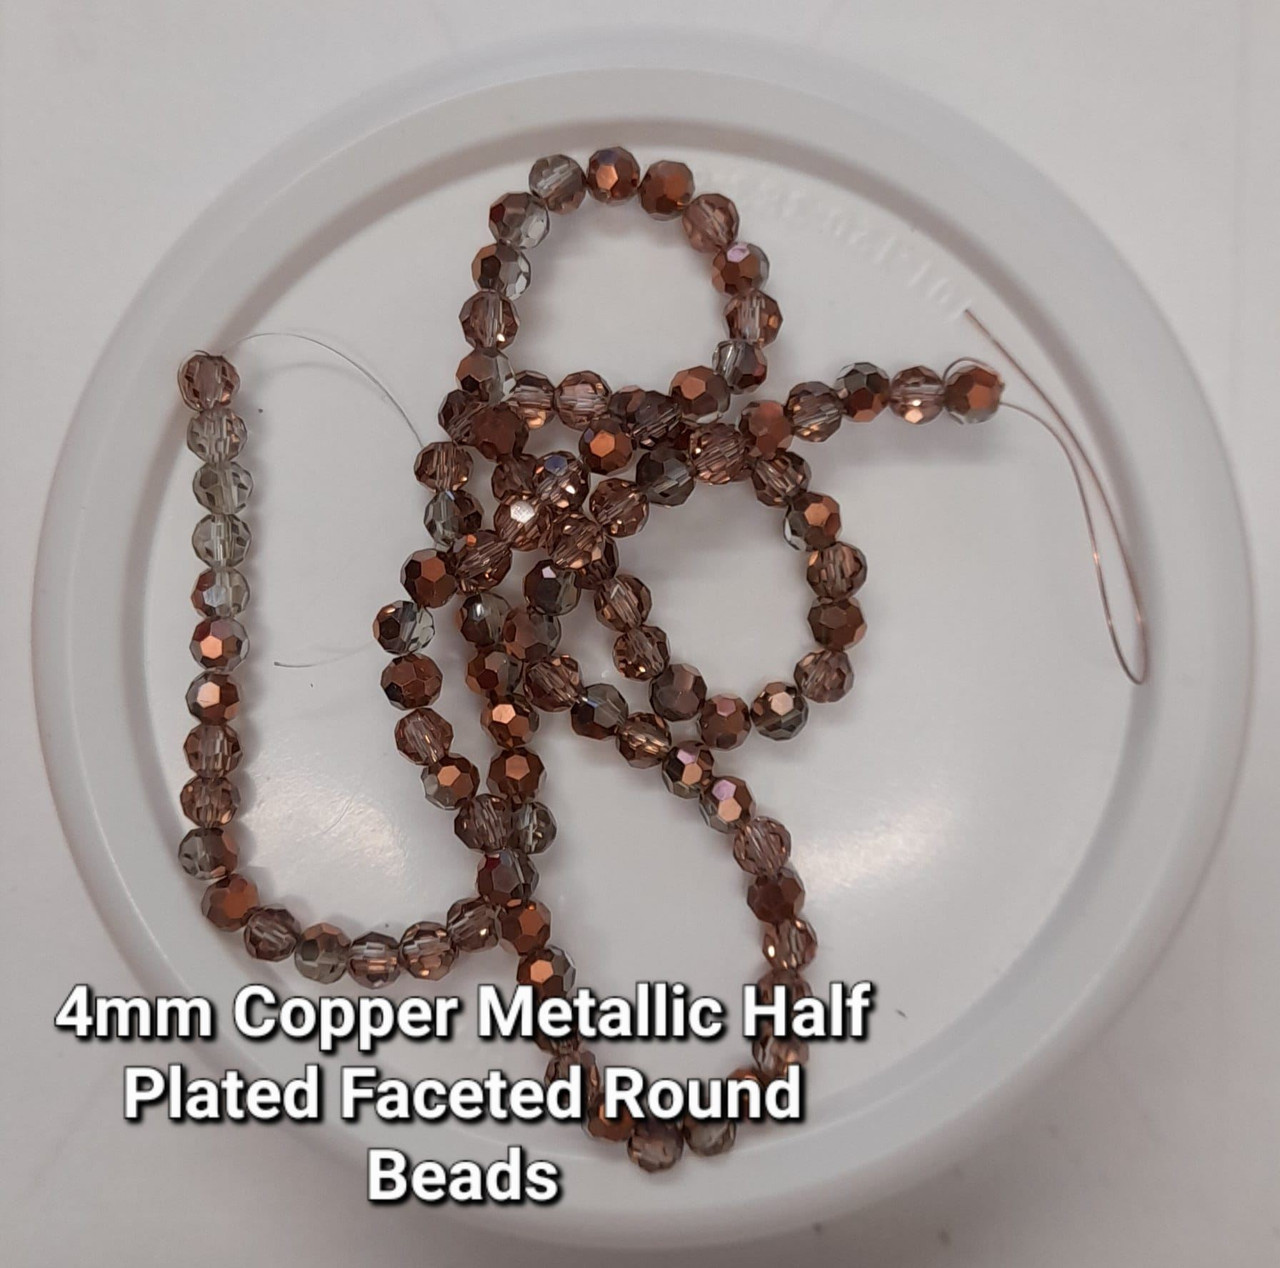 Strand of faceted round glass beads - approx 4mm, Half-Plated Copper Metallic, approx 100 beads, 14-16in